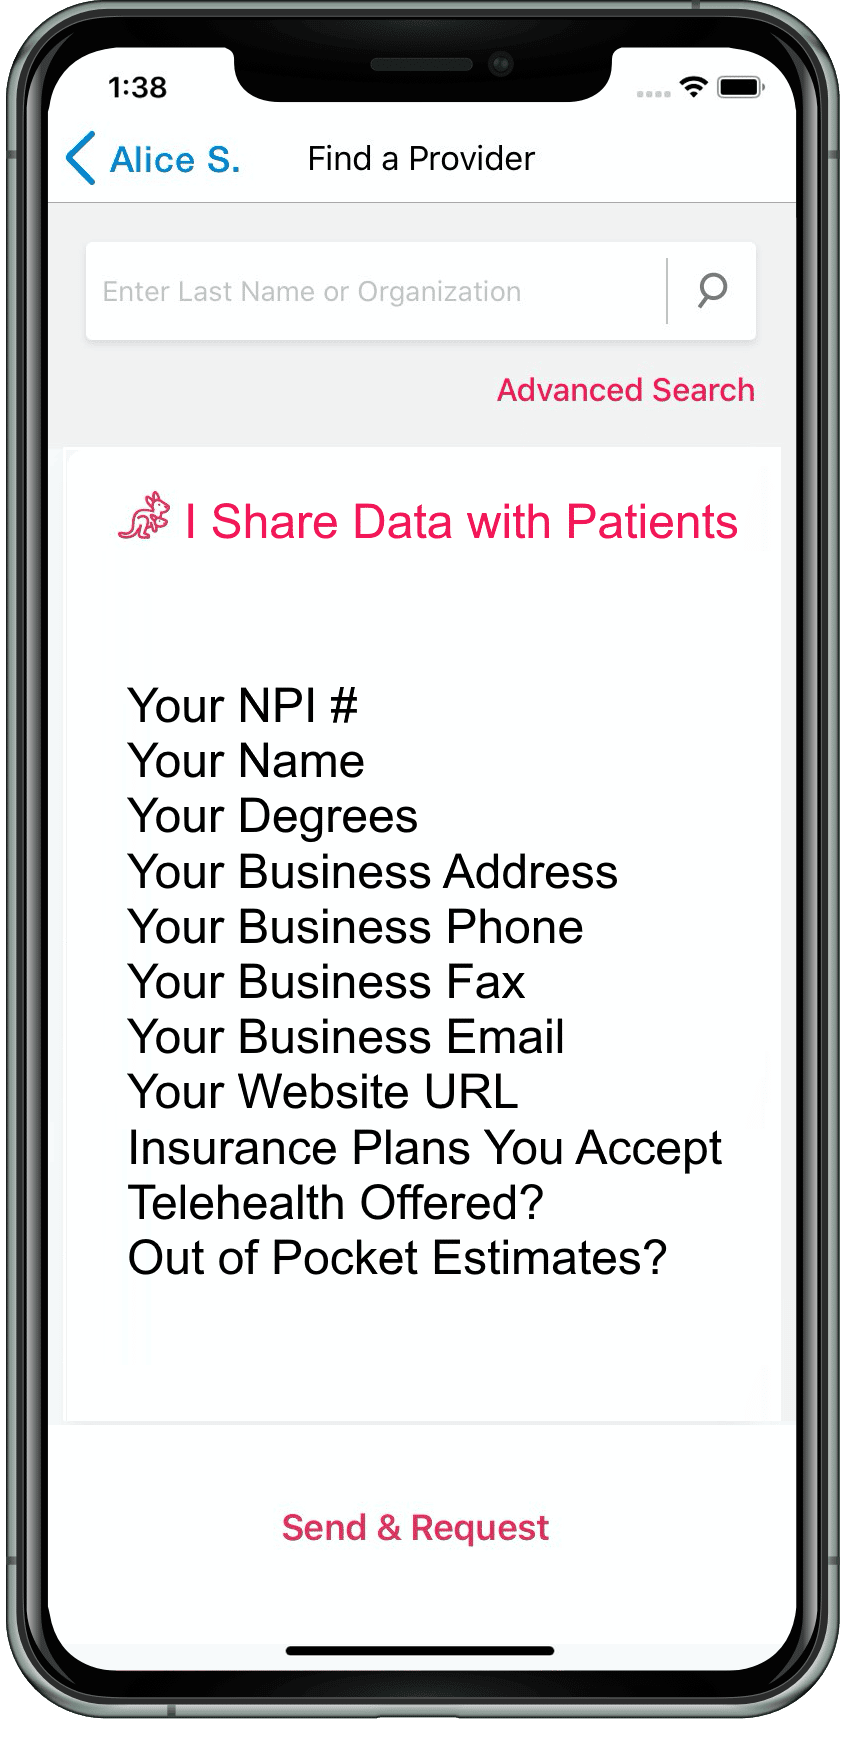 Find a provider in health data sharing app